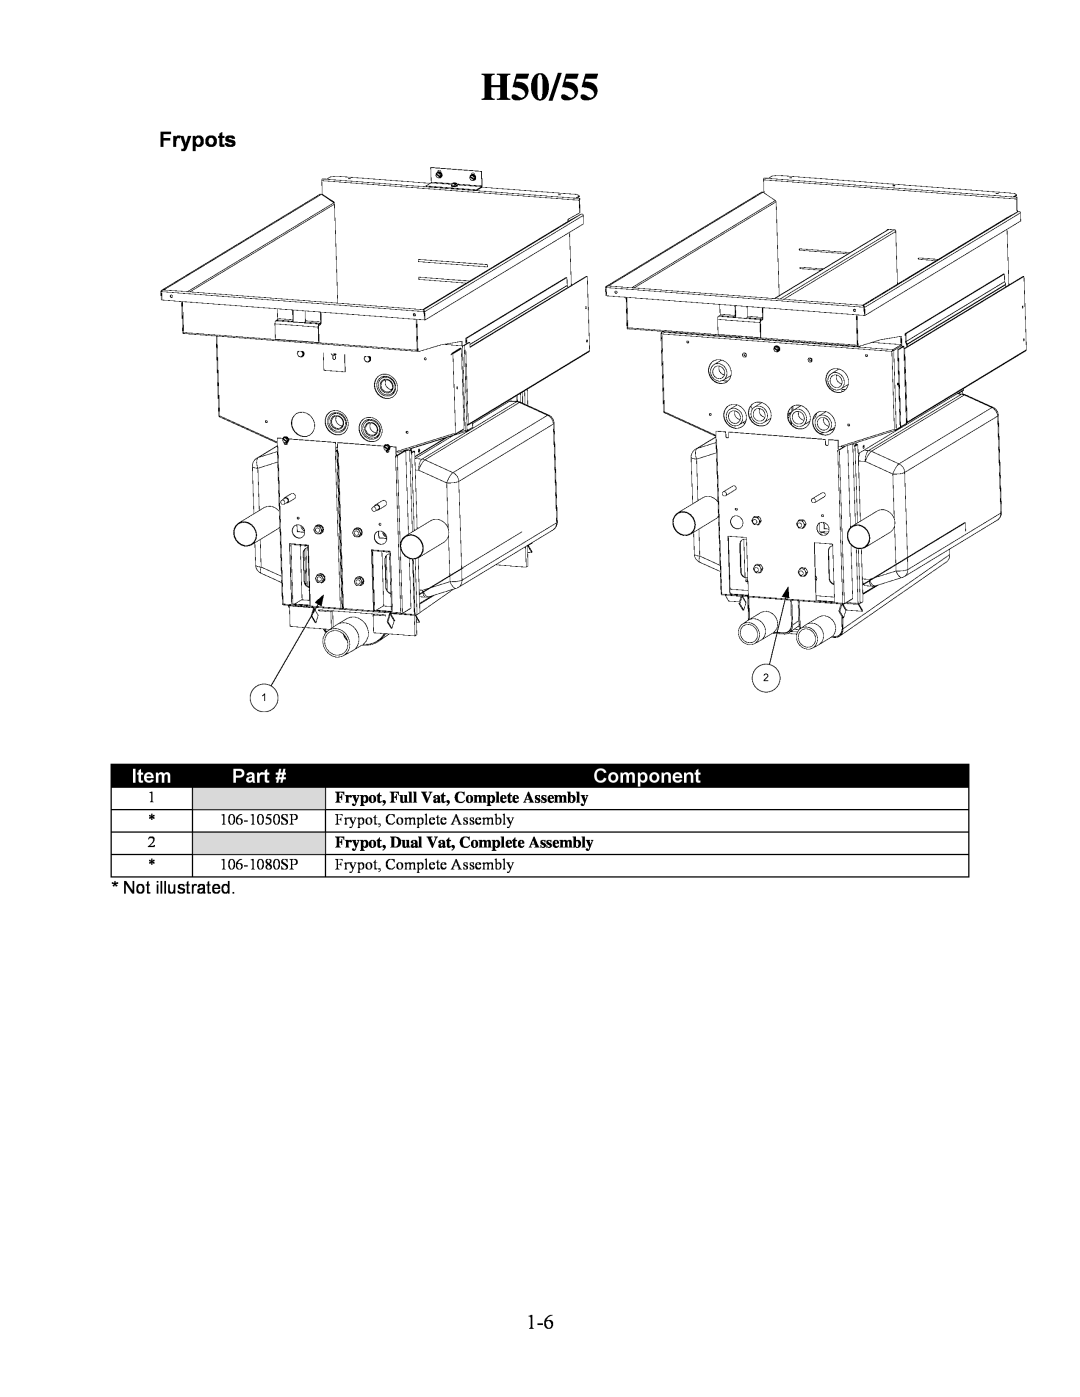 Frymaster H50/55, Component, Not illustrated, Frypot, Full Vat, Complete Assembly, 106-1050SP Frypot, Complete Assembly 